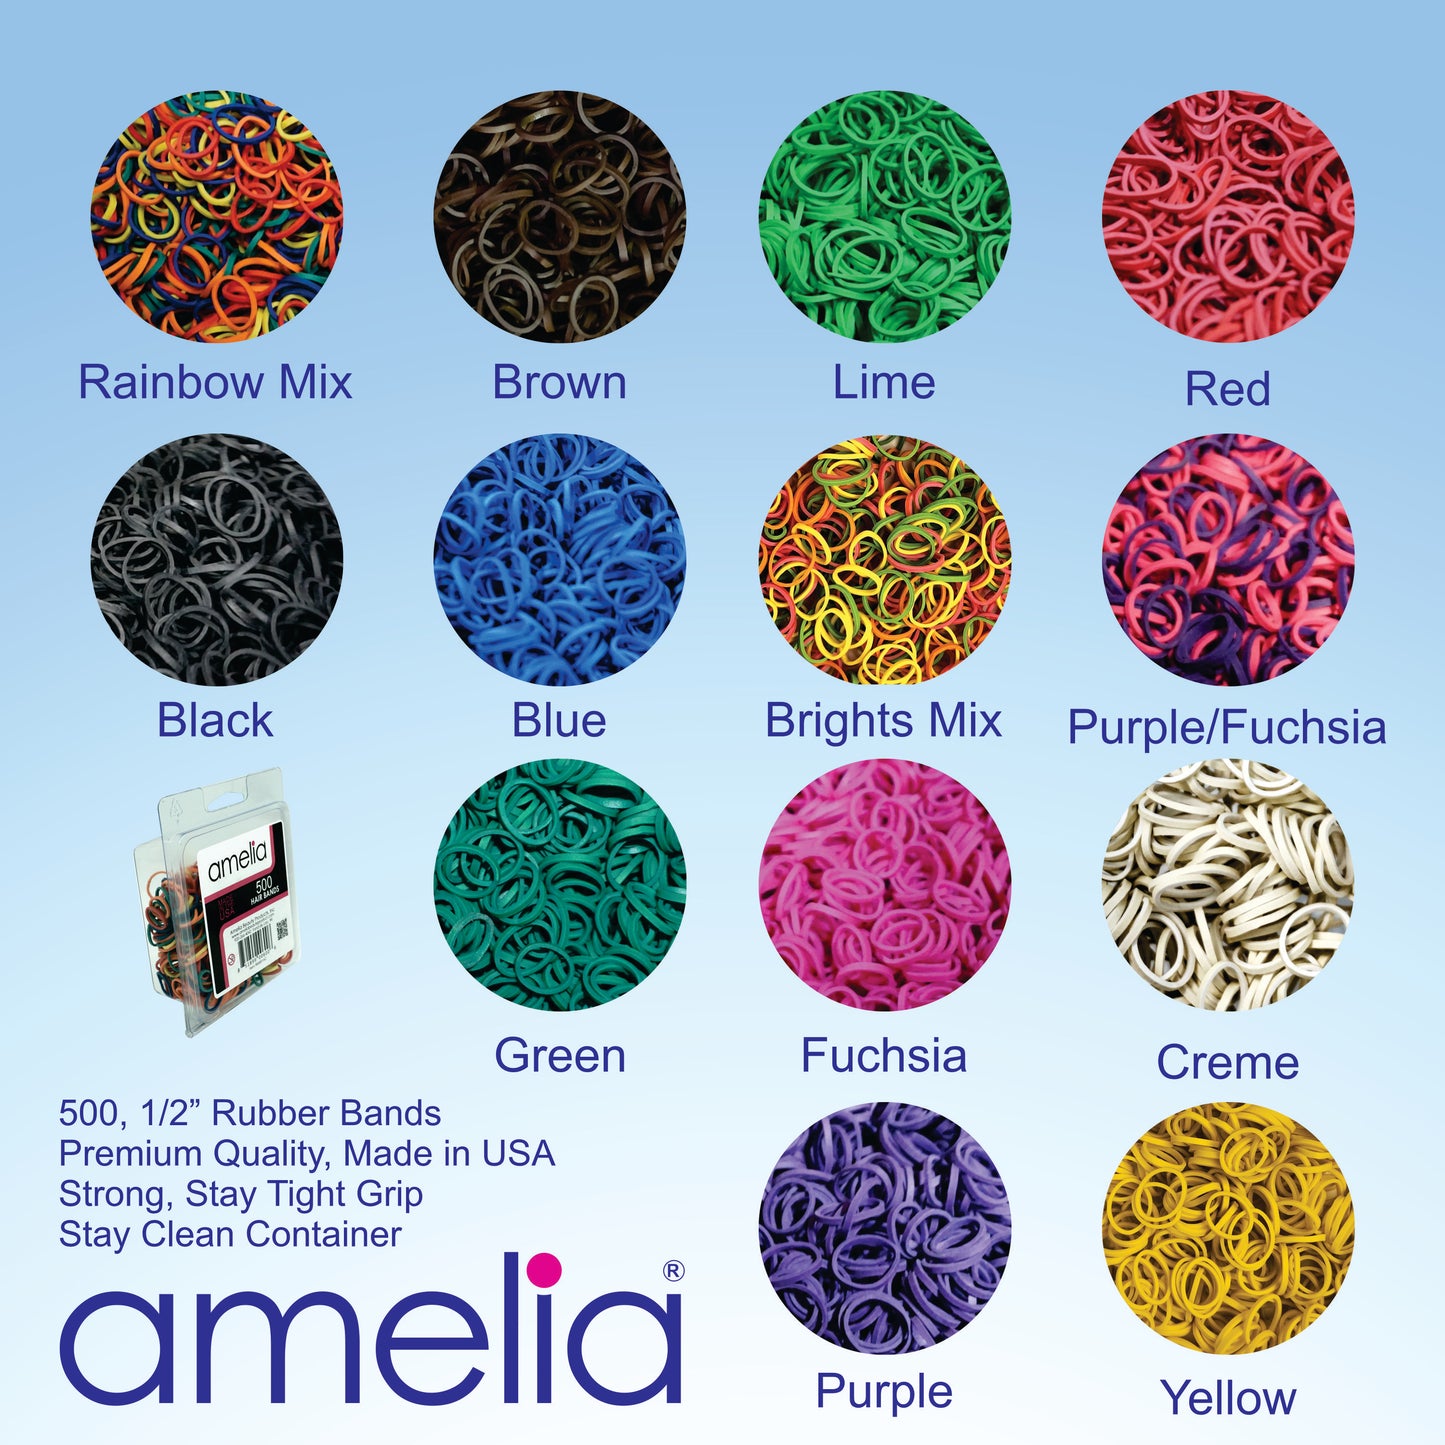 Amelia Beauty | 1/2in, Green, Elastic Rubber Band Pony Tail Holders | Made in USA, Ideal for Ponytails, Braids, Twists, Dreadlocks, Styling Accessories for Women, Men and Girls | 500 Pack